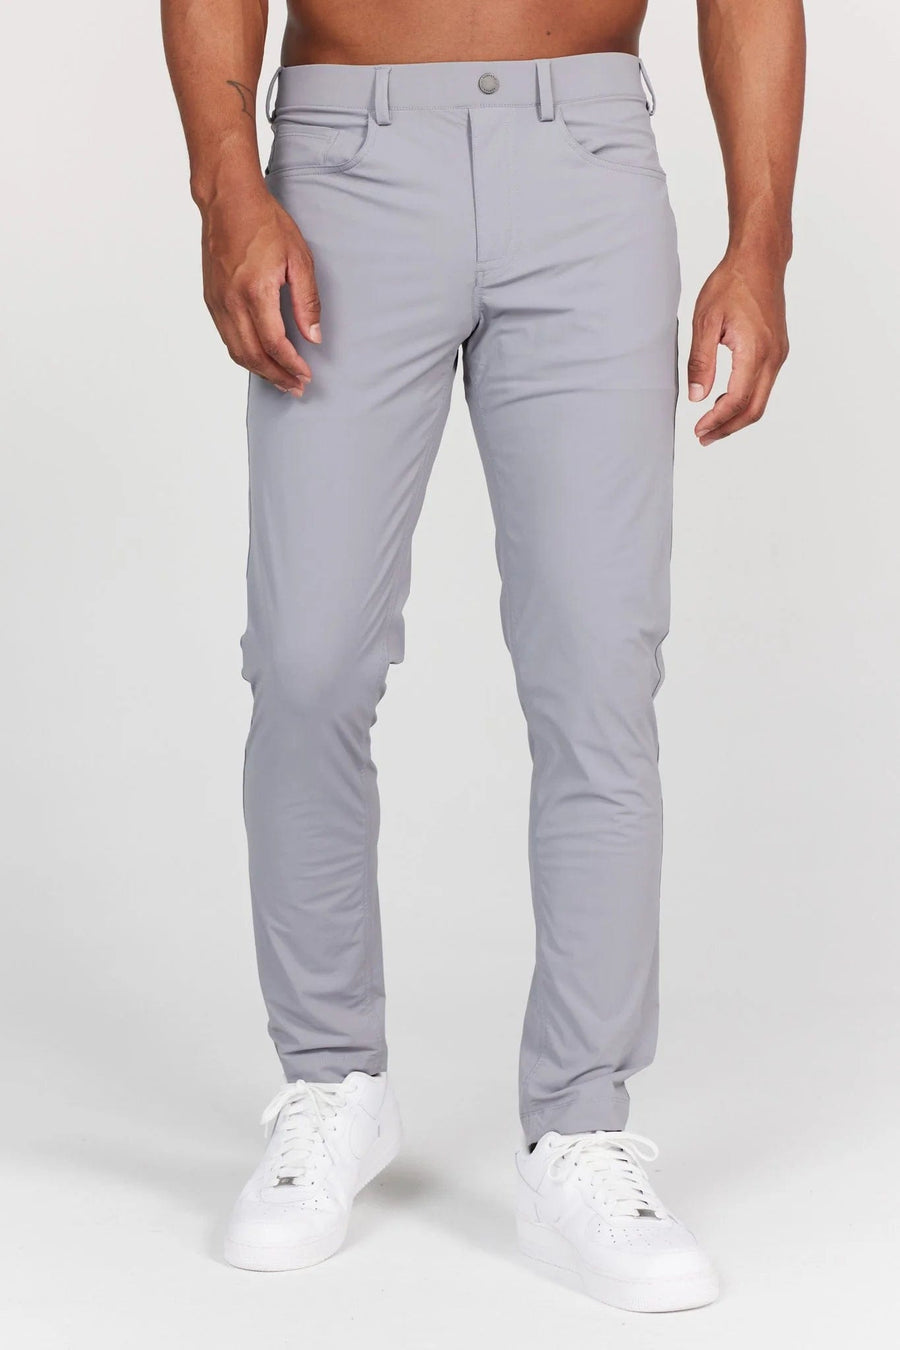 REDVANLY PANTS - FIVE POCKET SHADOW GREY / M KENT PULL-ON TROUSER